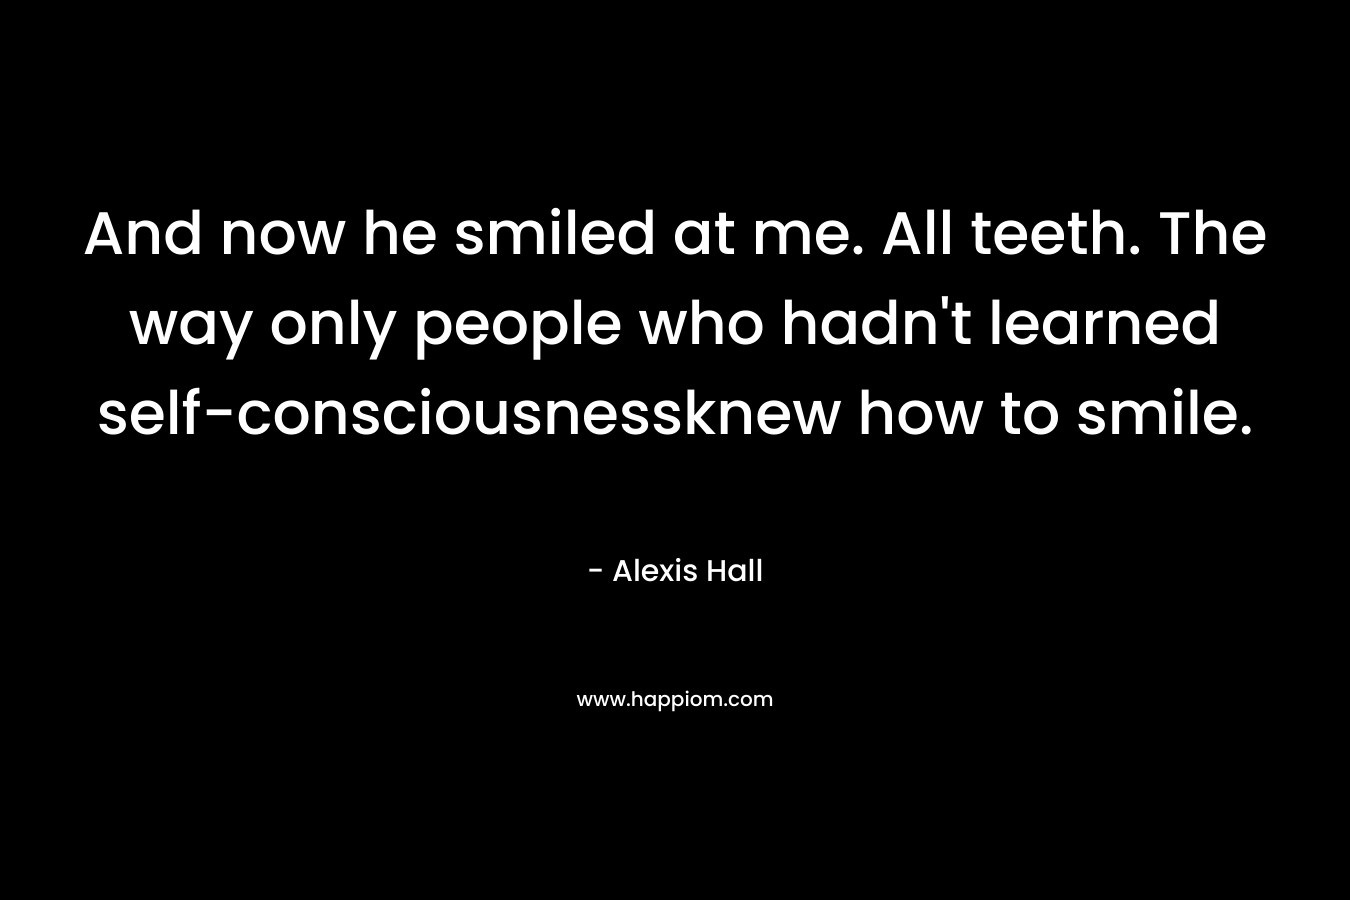 And now he smiled at me. All teeth. The way only people who hadn't learned self-consciousnessknew how to smile.